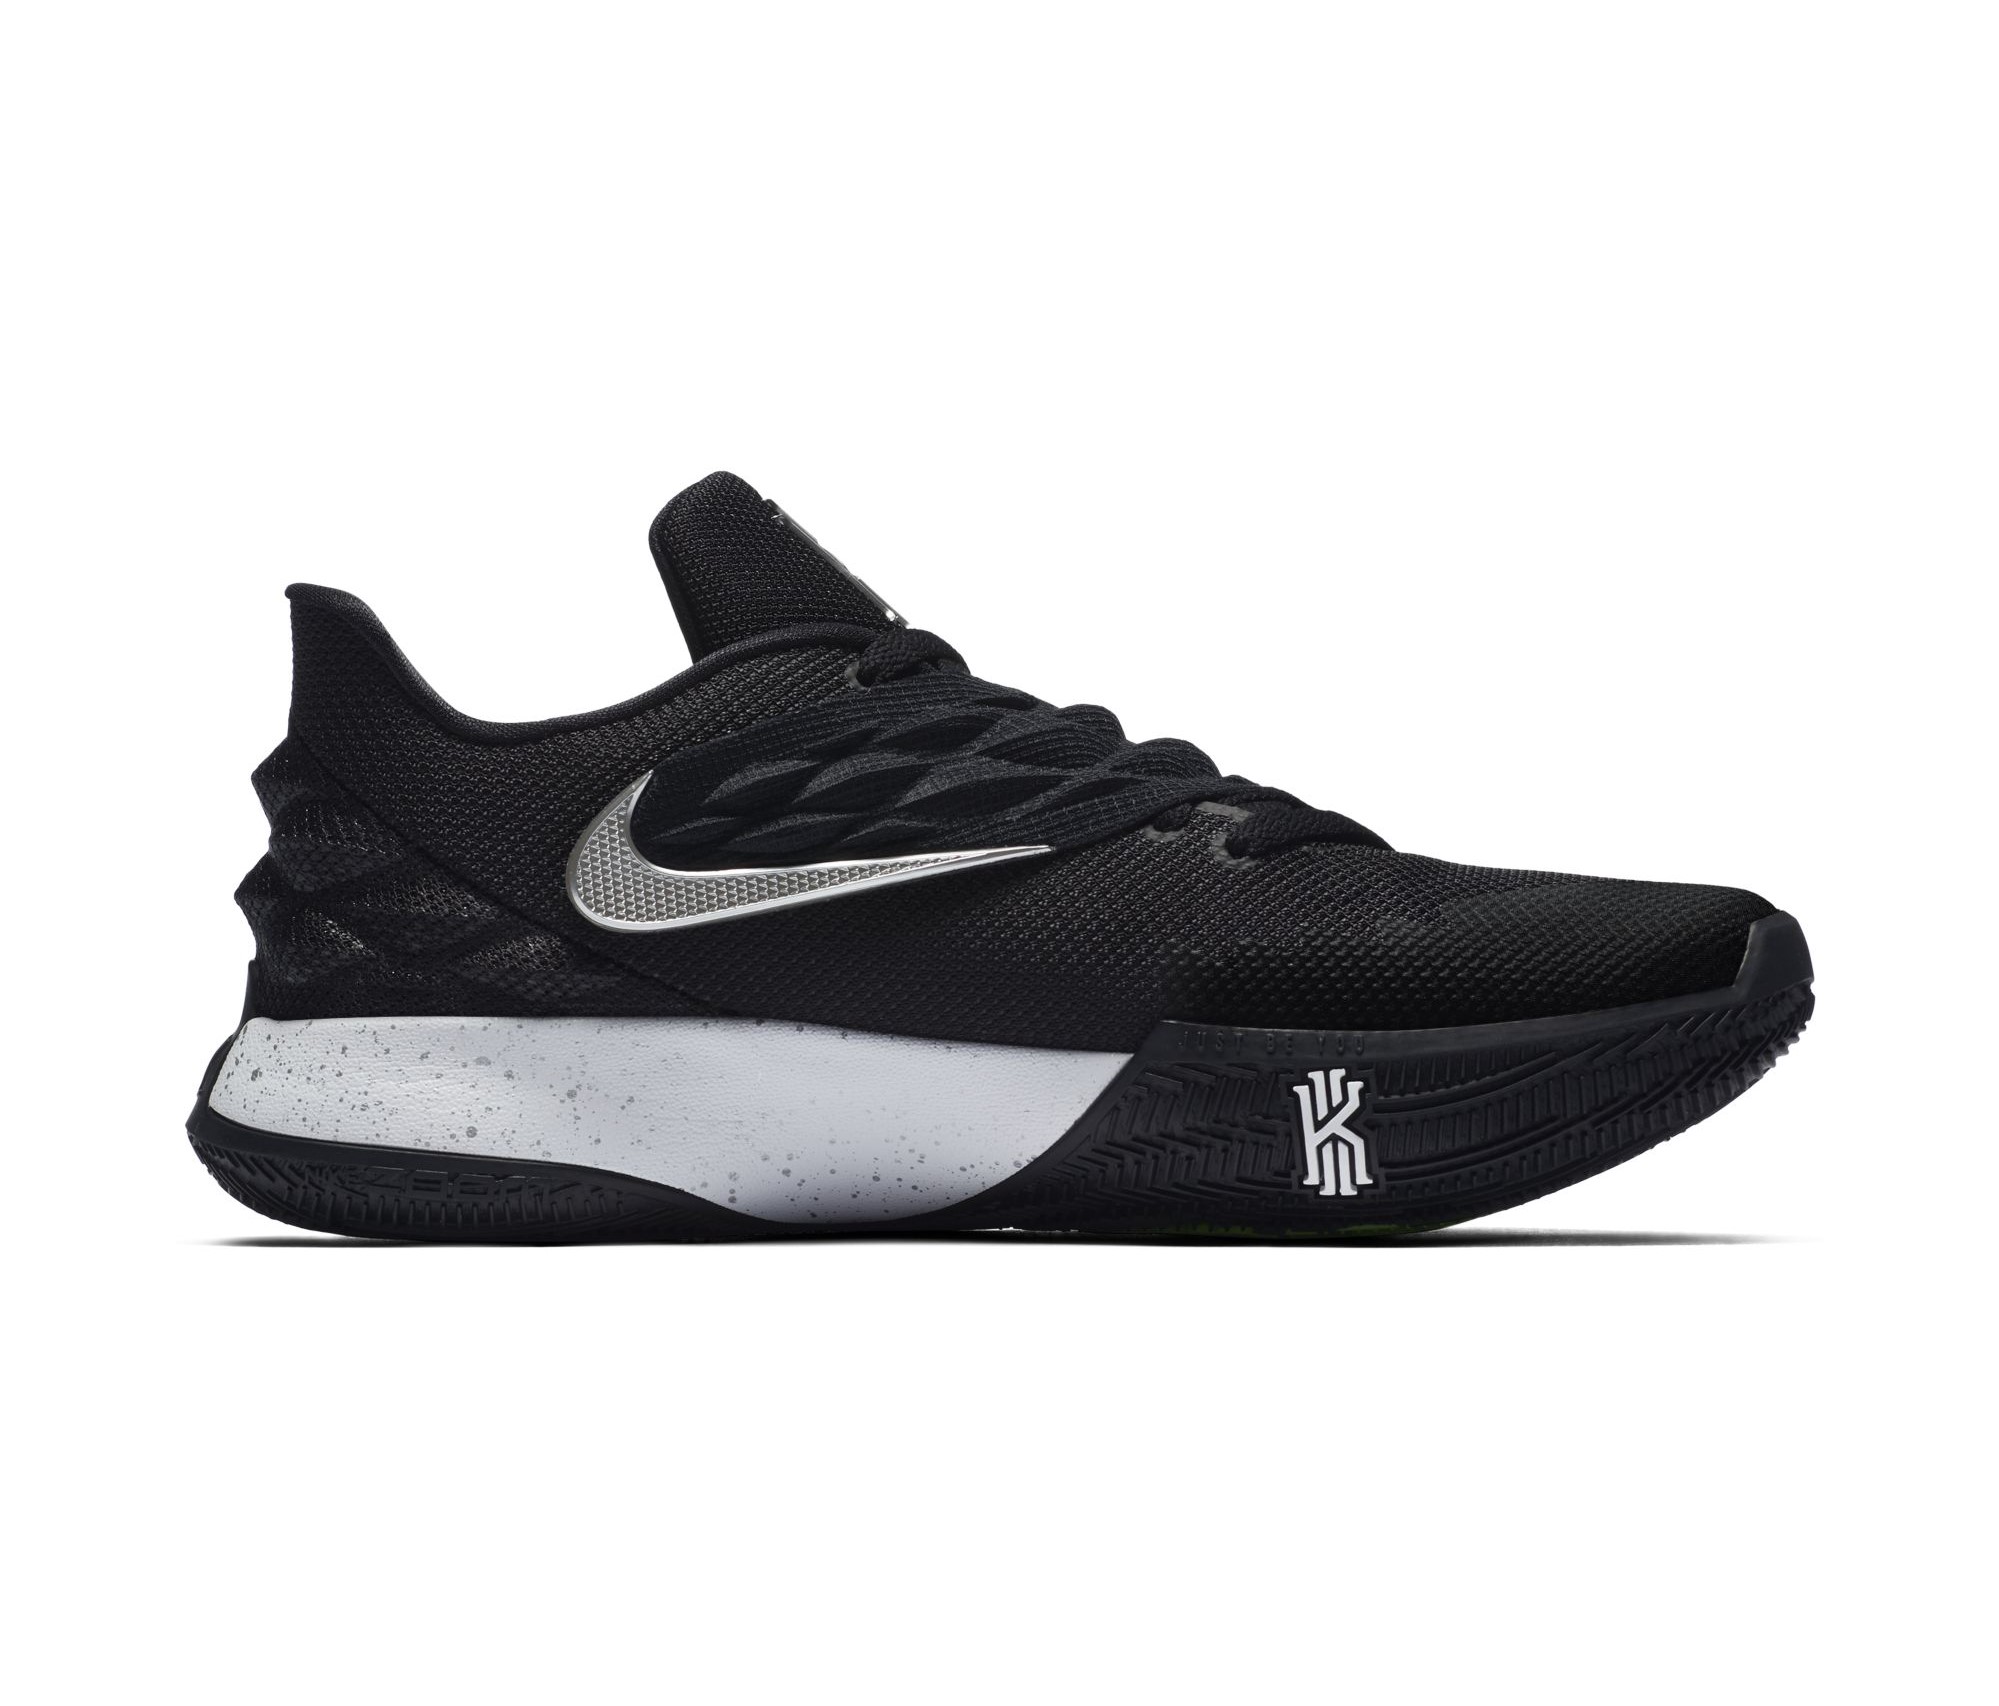 The Nike Kyrie 4 Low is Clean in Black and White - WearTesters